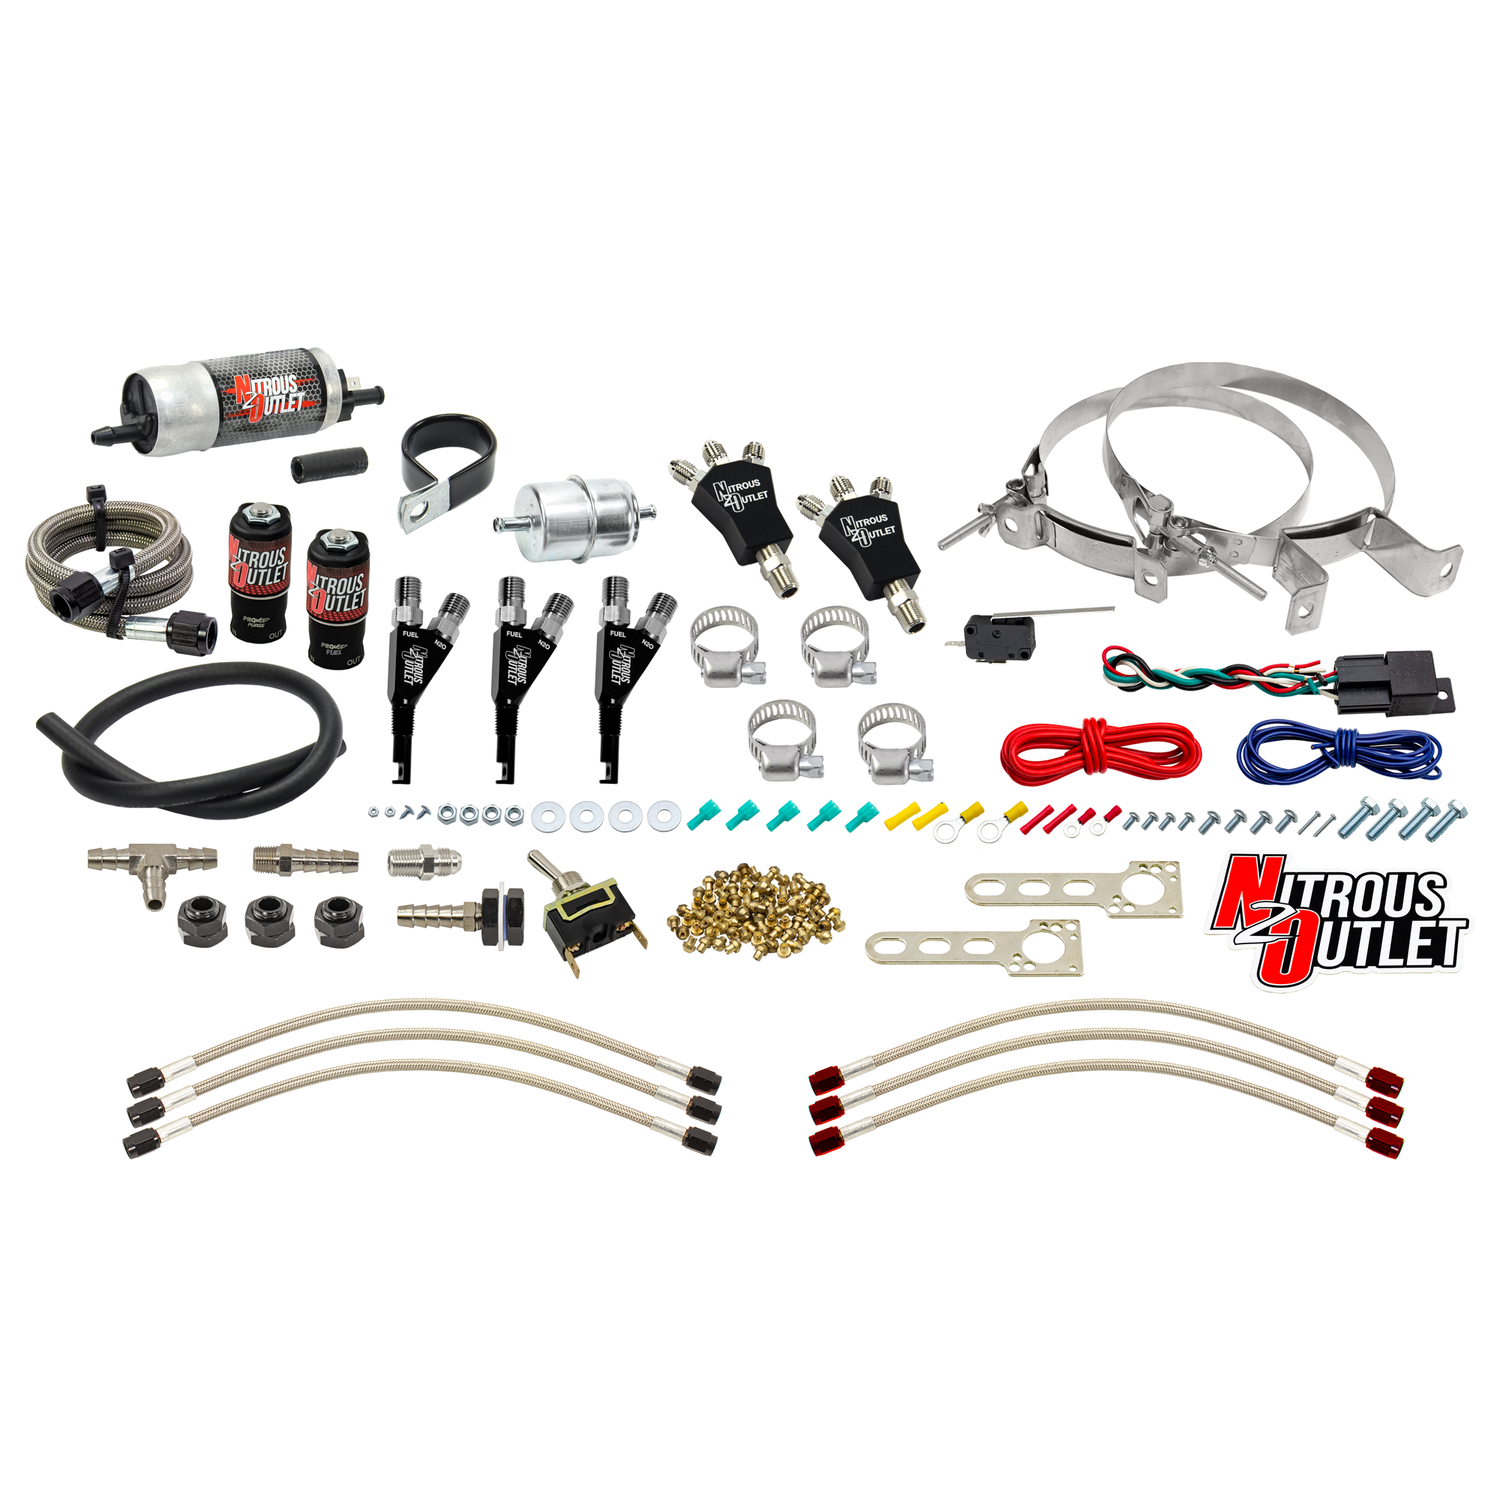 Three Cylinder Powersports Carbureted Nitrous Systems